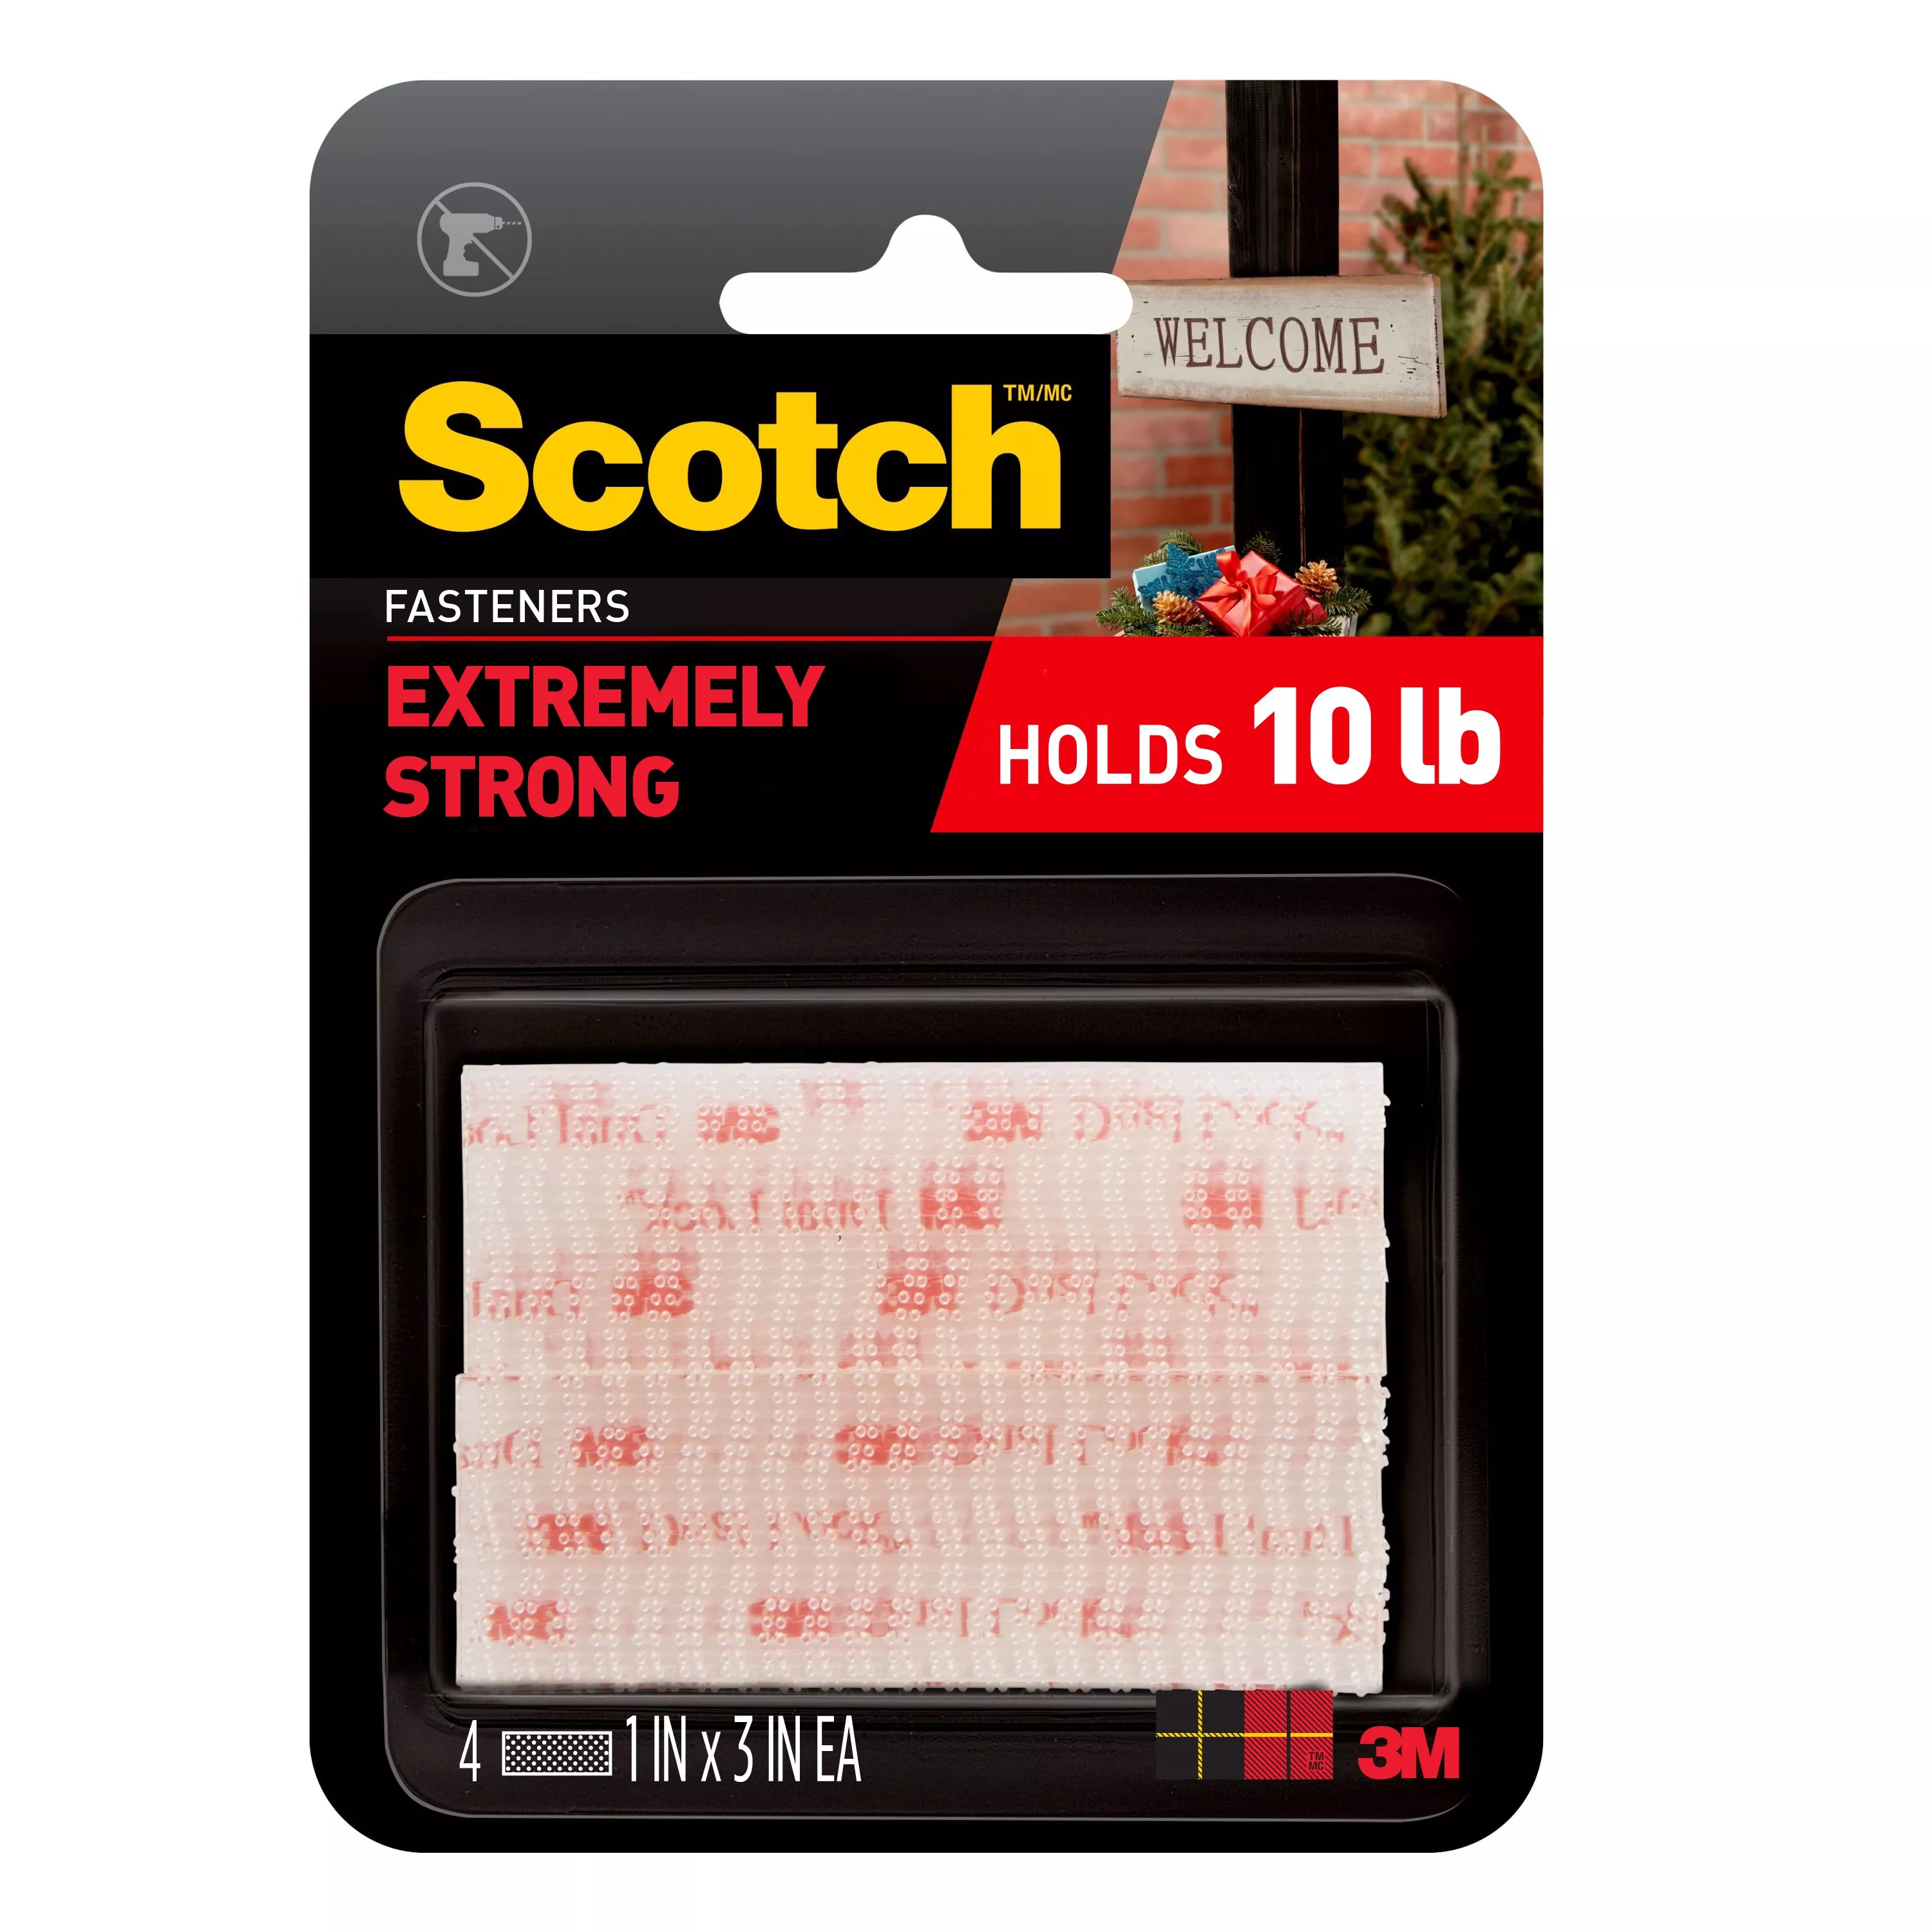 Scotch™ Extreme Fasteners RFD7090, 1 in x 3 in (25,4 mm x 76,2 mm),
Clear 2 Sets of Strips